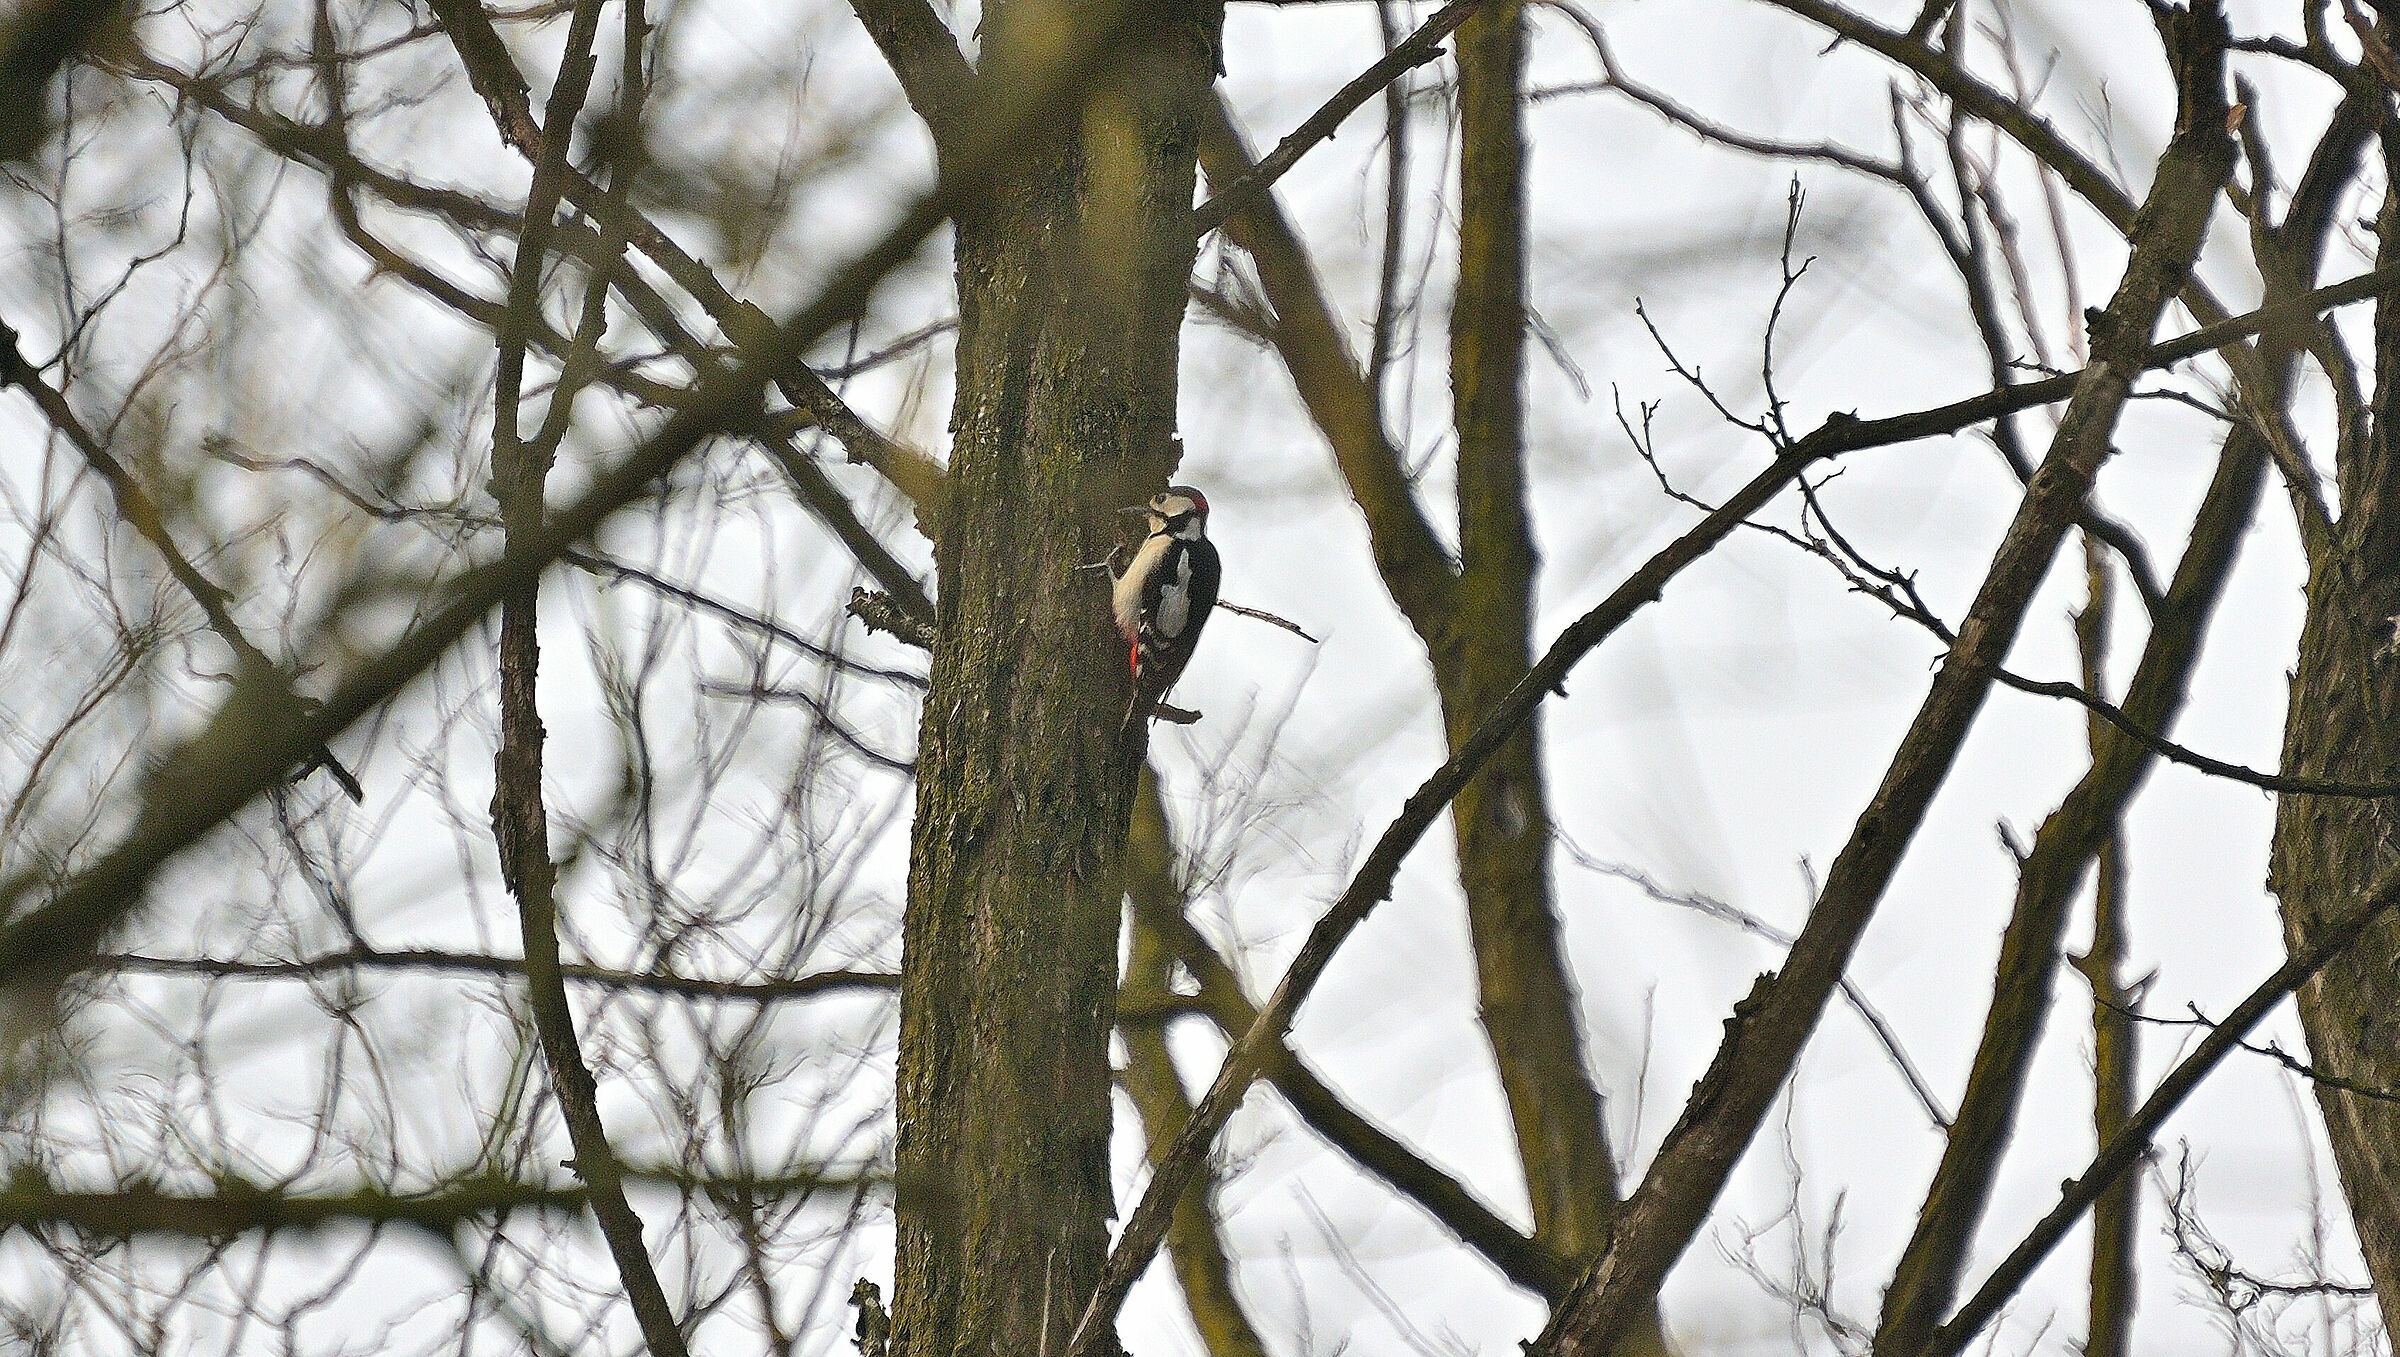 The Woodpecker at Work......